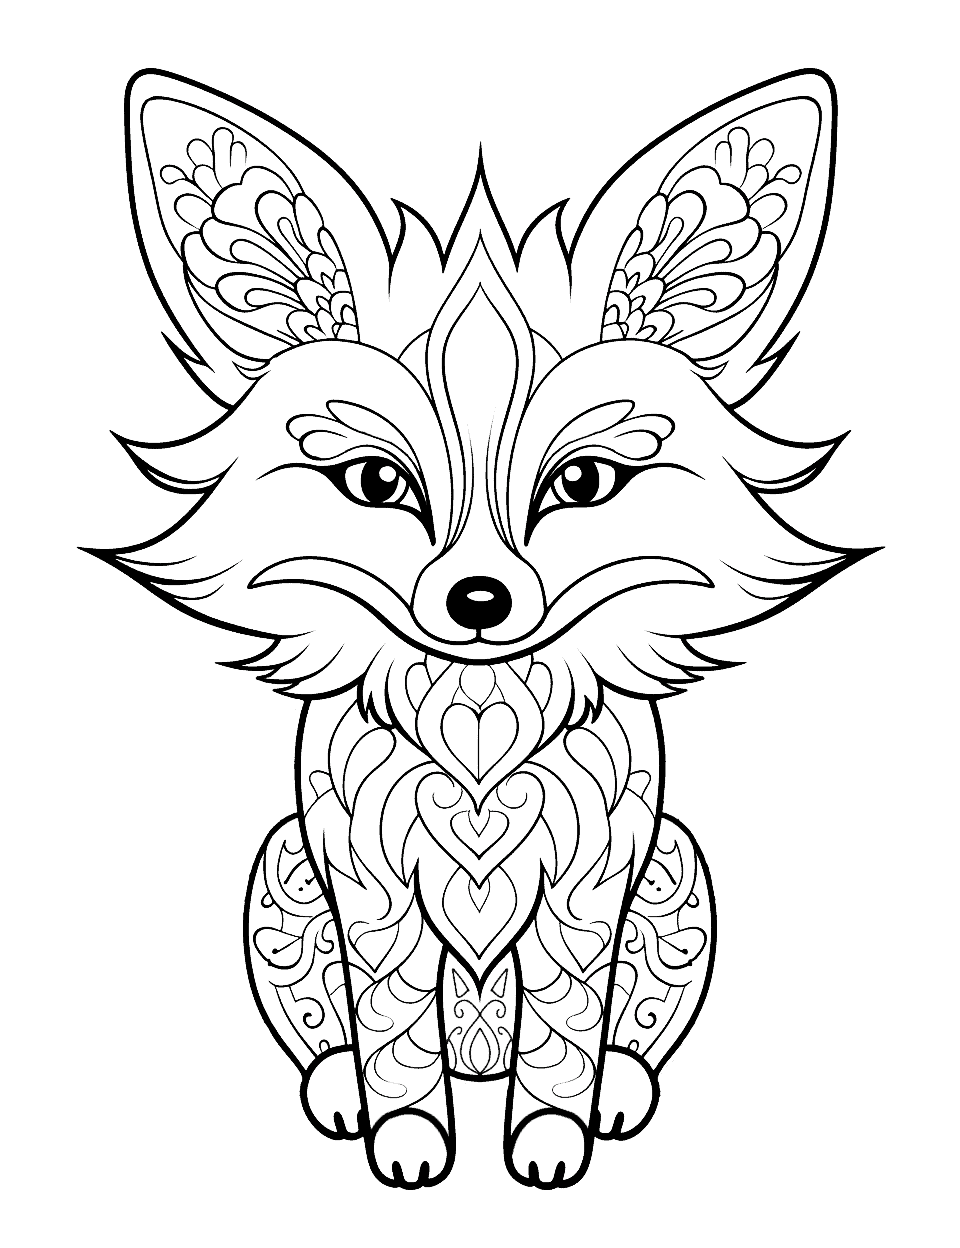 Fox coloring pages free printable sheets